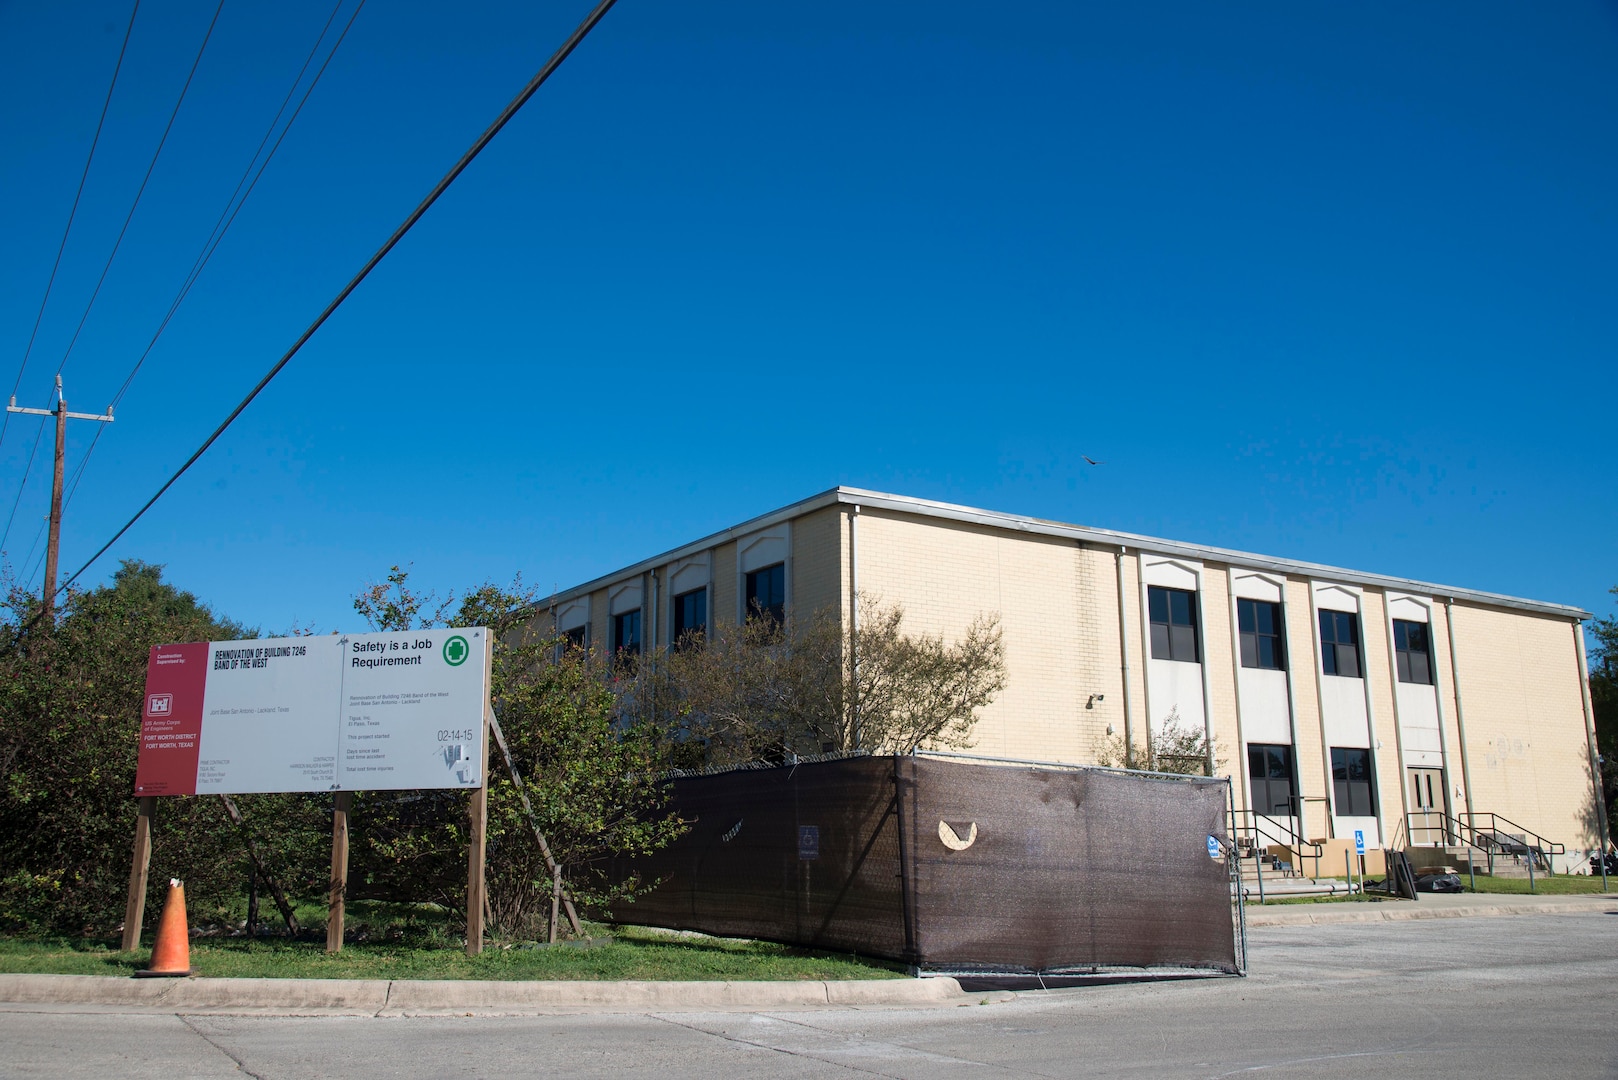 Band of the West is moving to its new home, the former basic military training reception center at Joint Base San Antonio-Lackland, in early November 2017. The $7 million dollar renovation project began in 2014, however, due to congressional sequestration, construction was halted and did not resumed until December 2016.